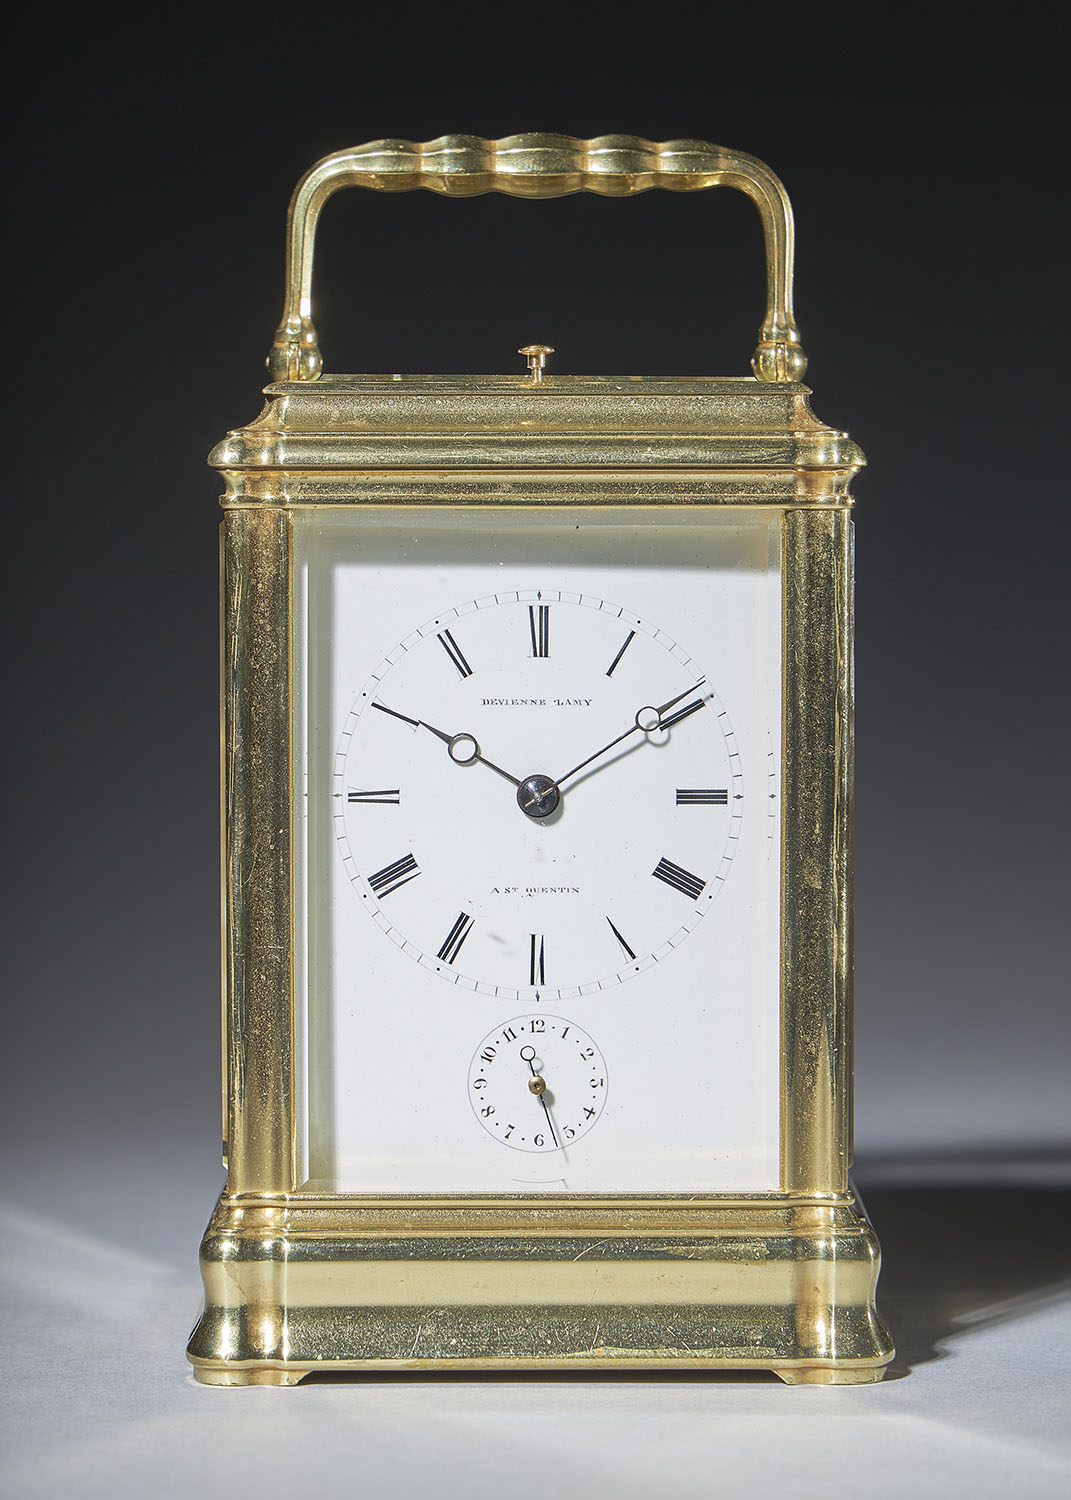 A Rare And Unusual 19th-Century Carriage Clock Signed Devienne Lamy A St Quentin, Circa: 1860 2